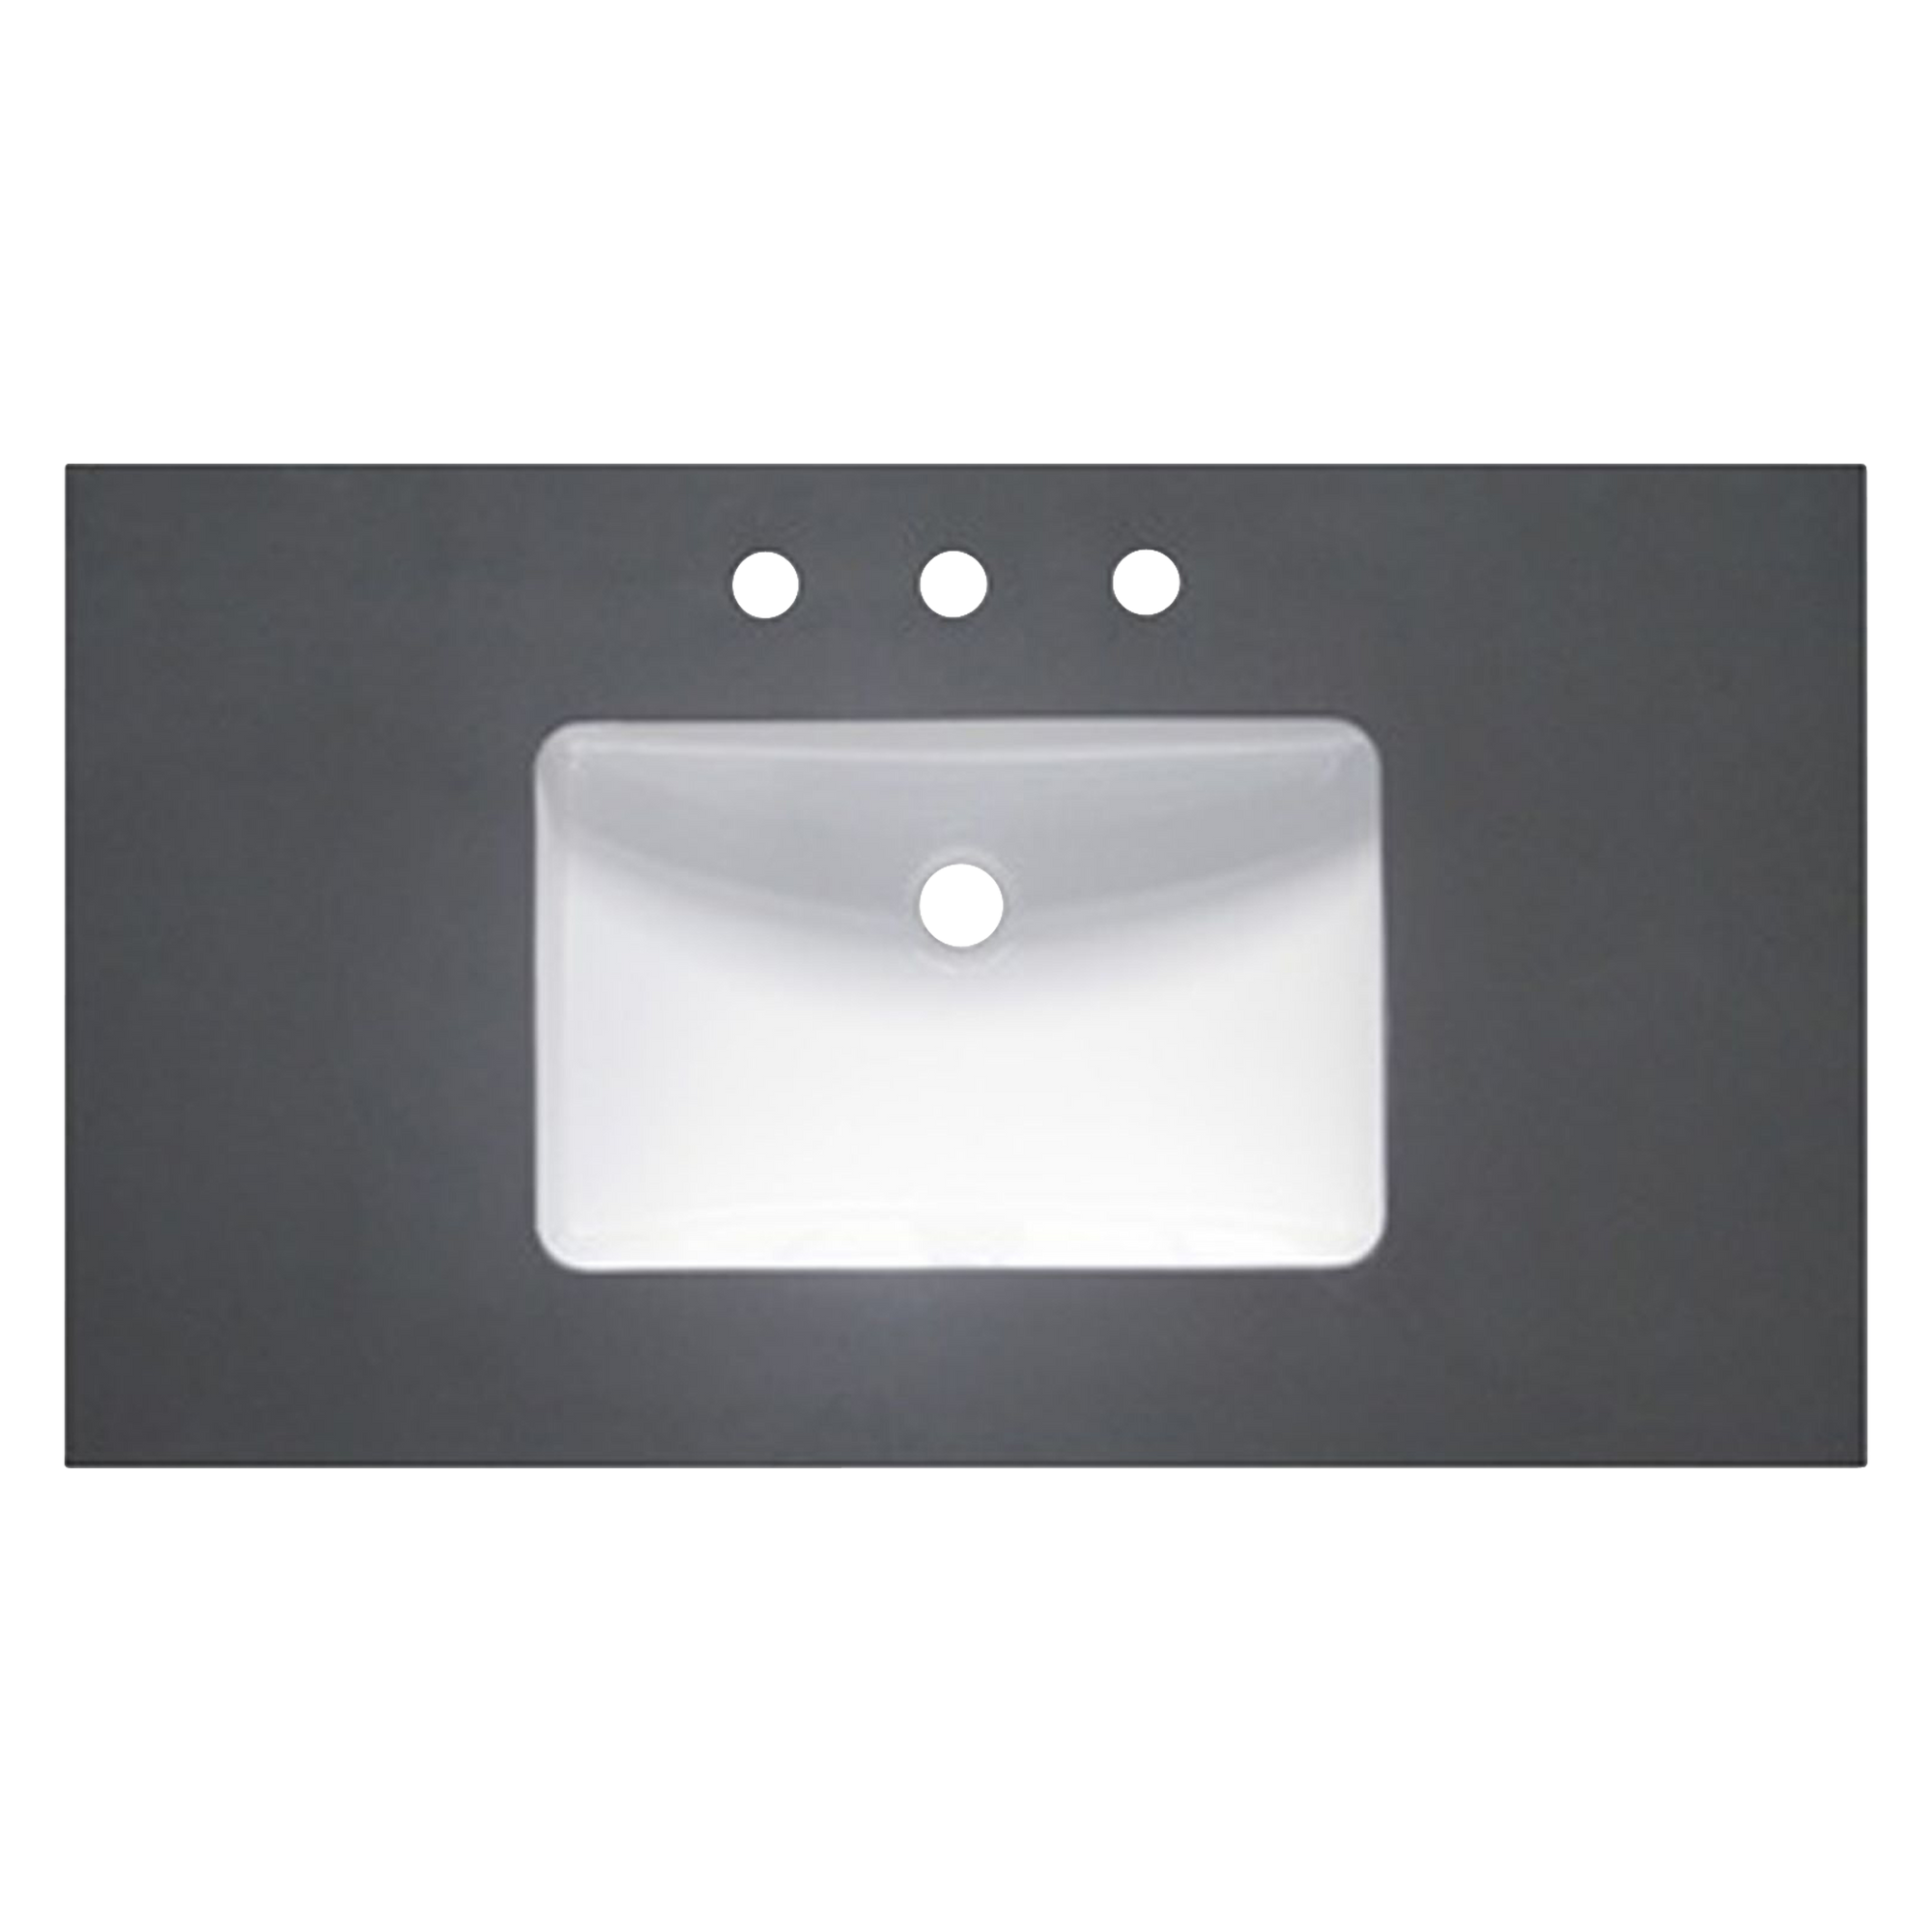 Adorn your vanity with this beautiful countertop made of Quartz featured in deep grey.